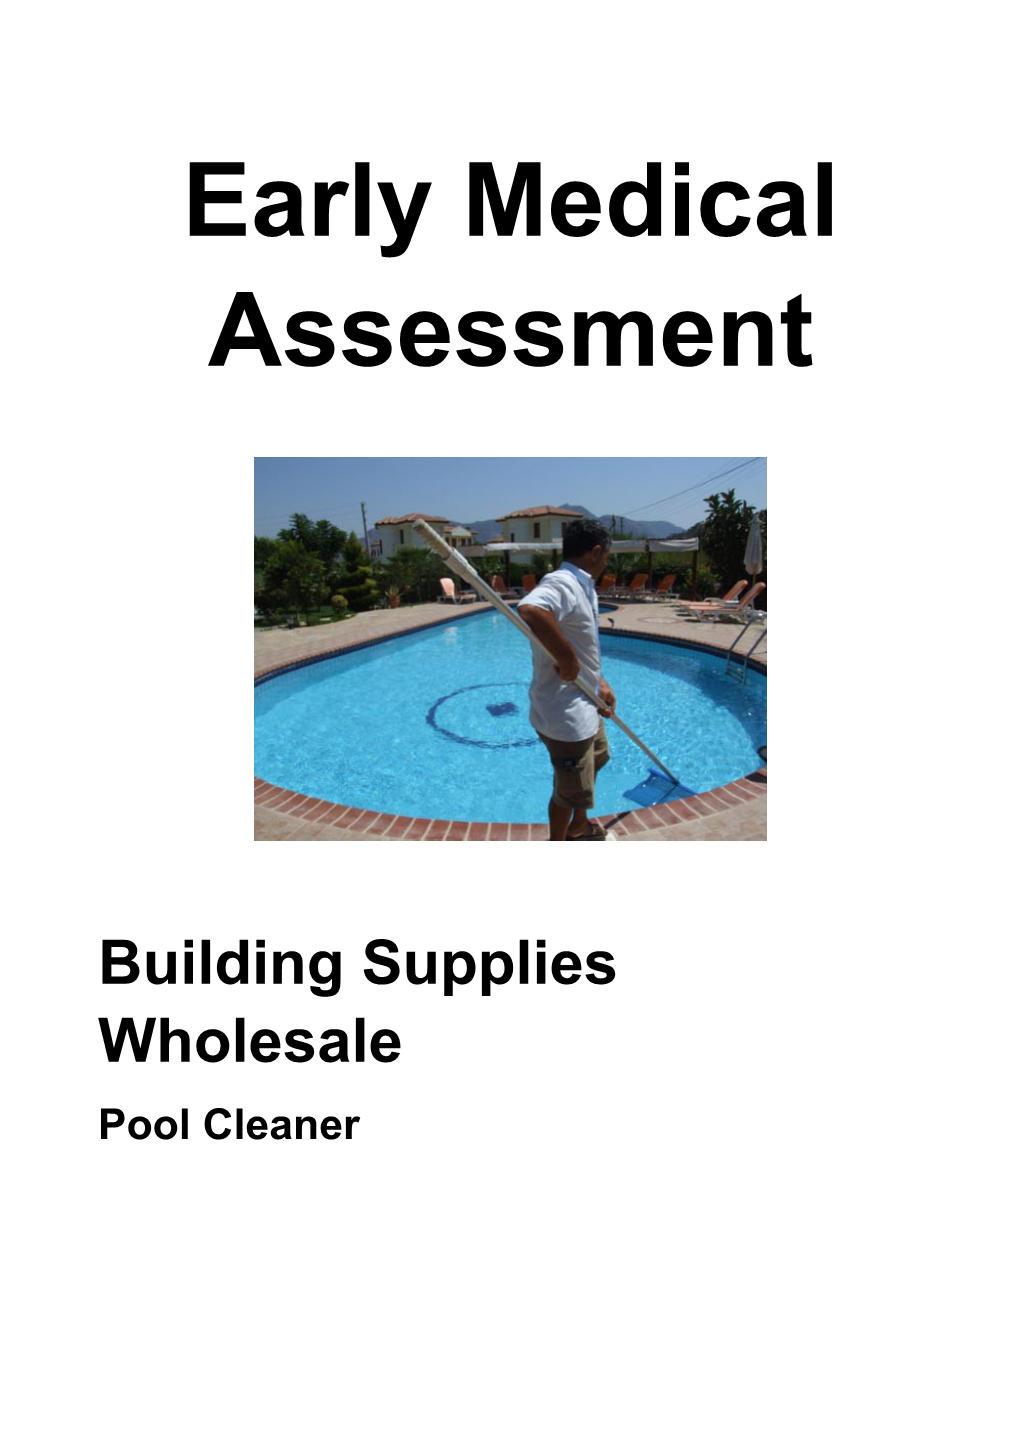 Building Supplies Wholesale - Pool Cleaner